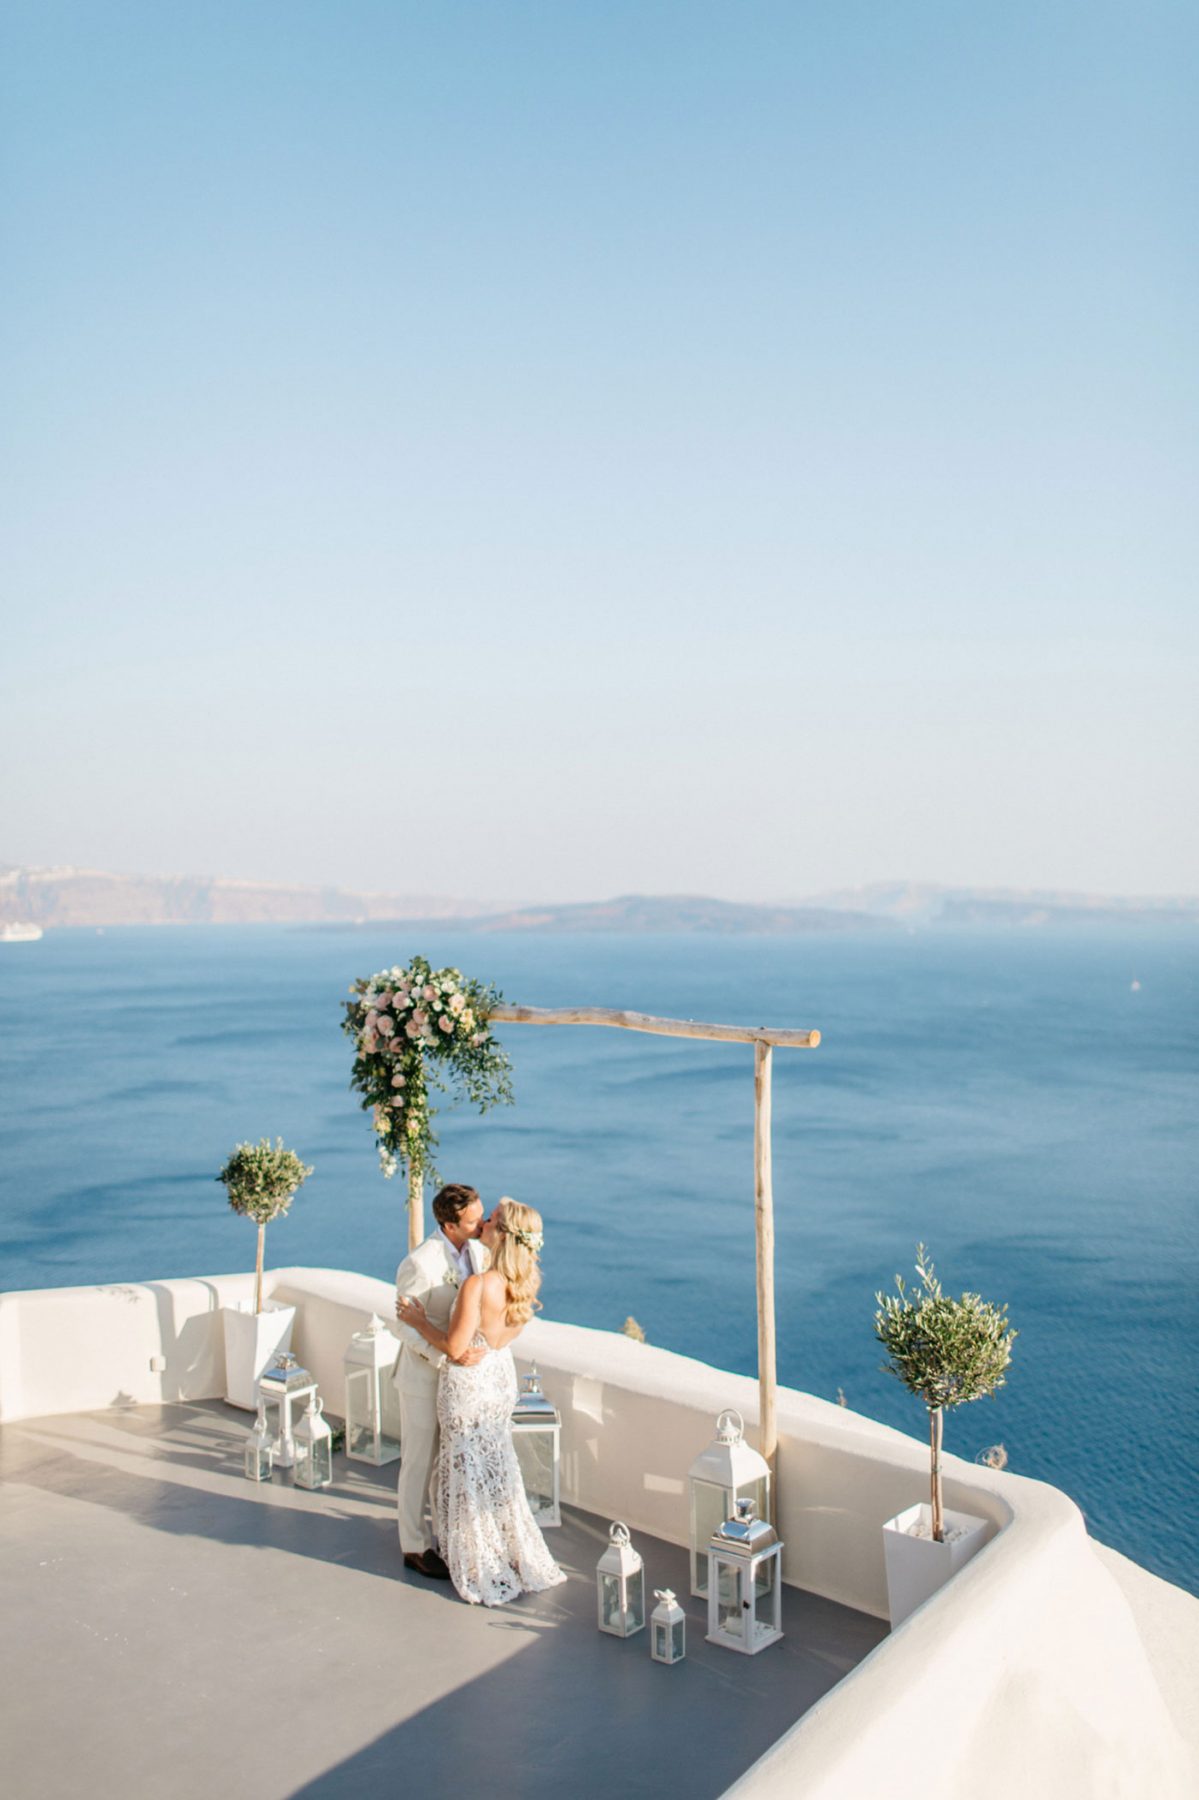 Canaves Oia Suites Wedding Venue